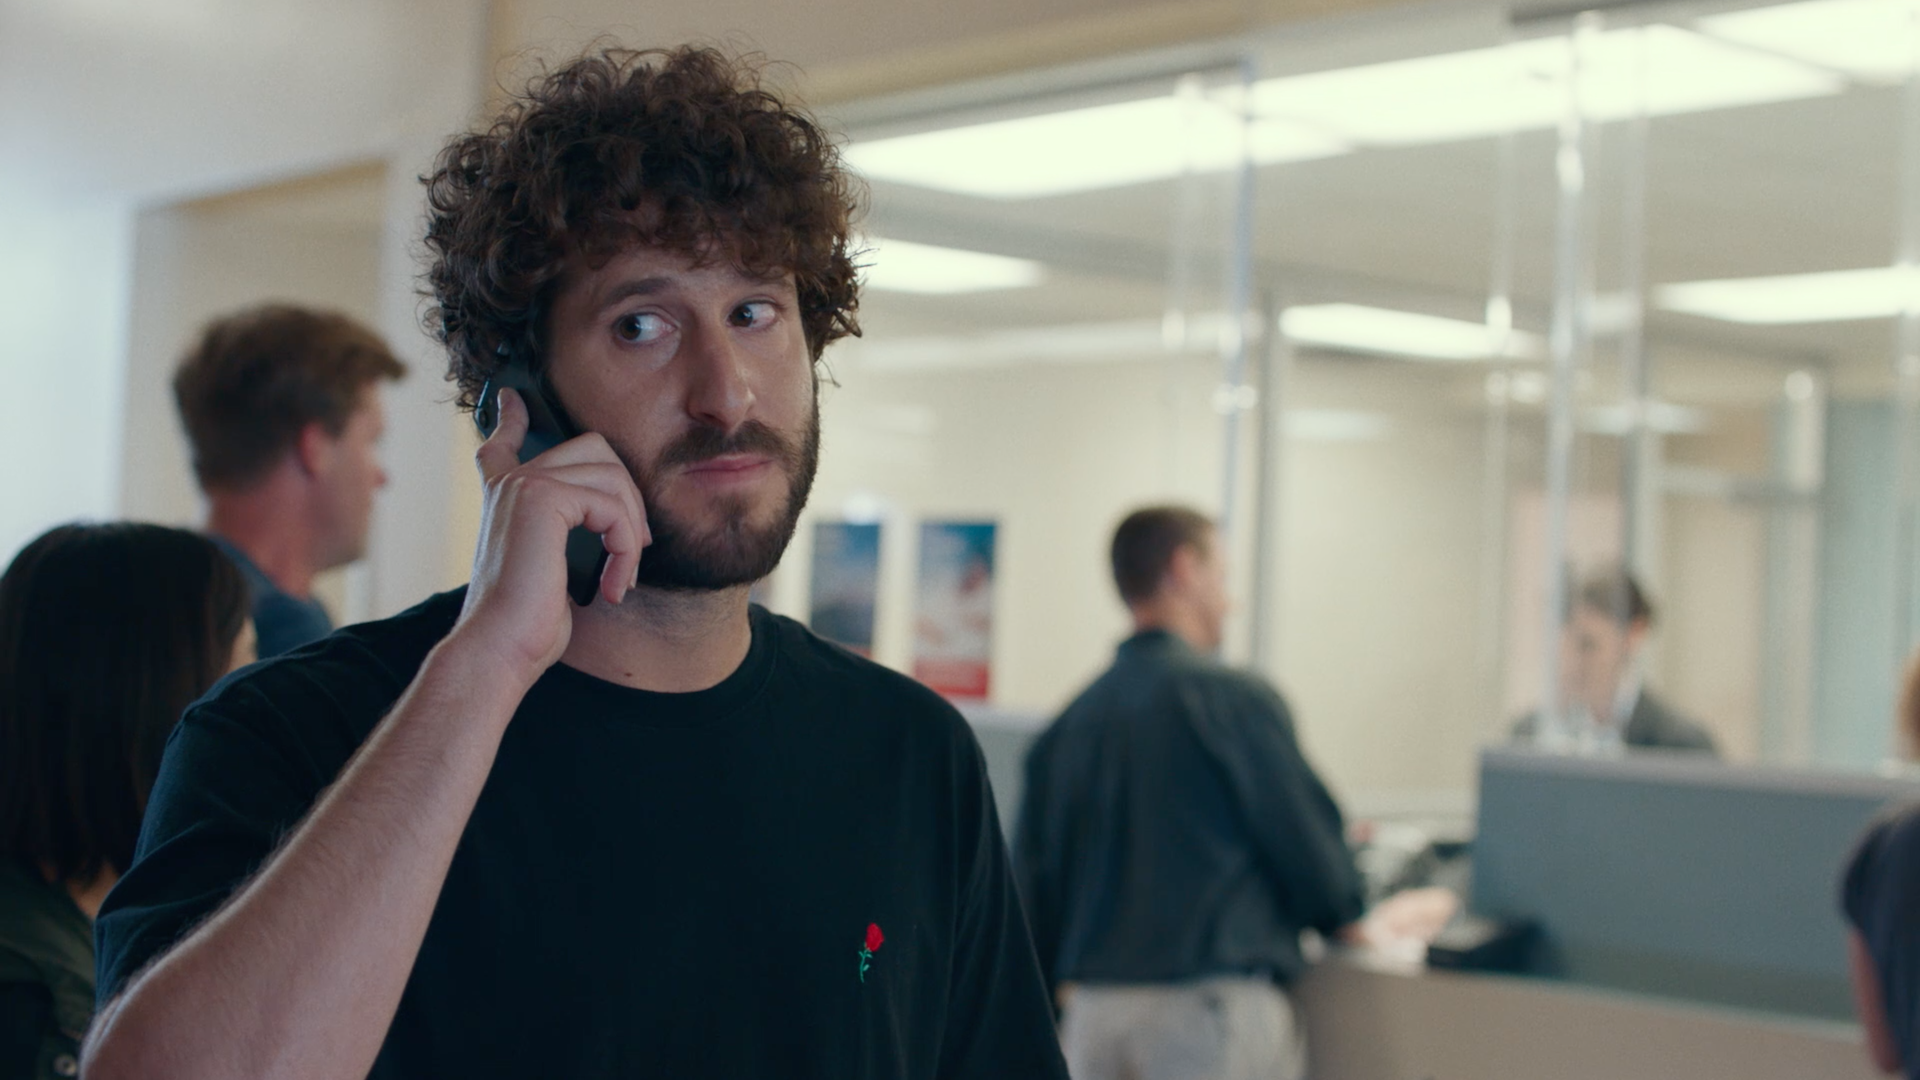 Get dicked down. Lil Dicky. David less. Lil Dicky without Beard. Lil Dicky dating- what is the History of Lil Dicky's relationships?.